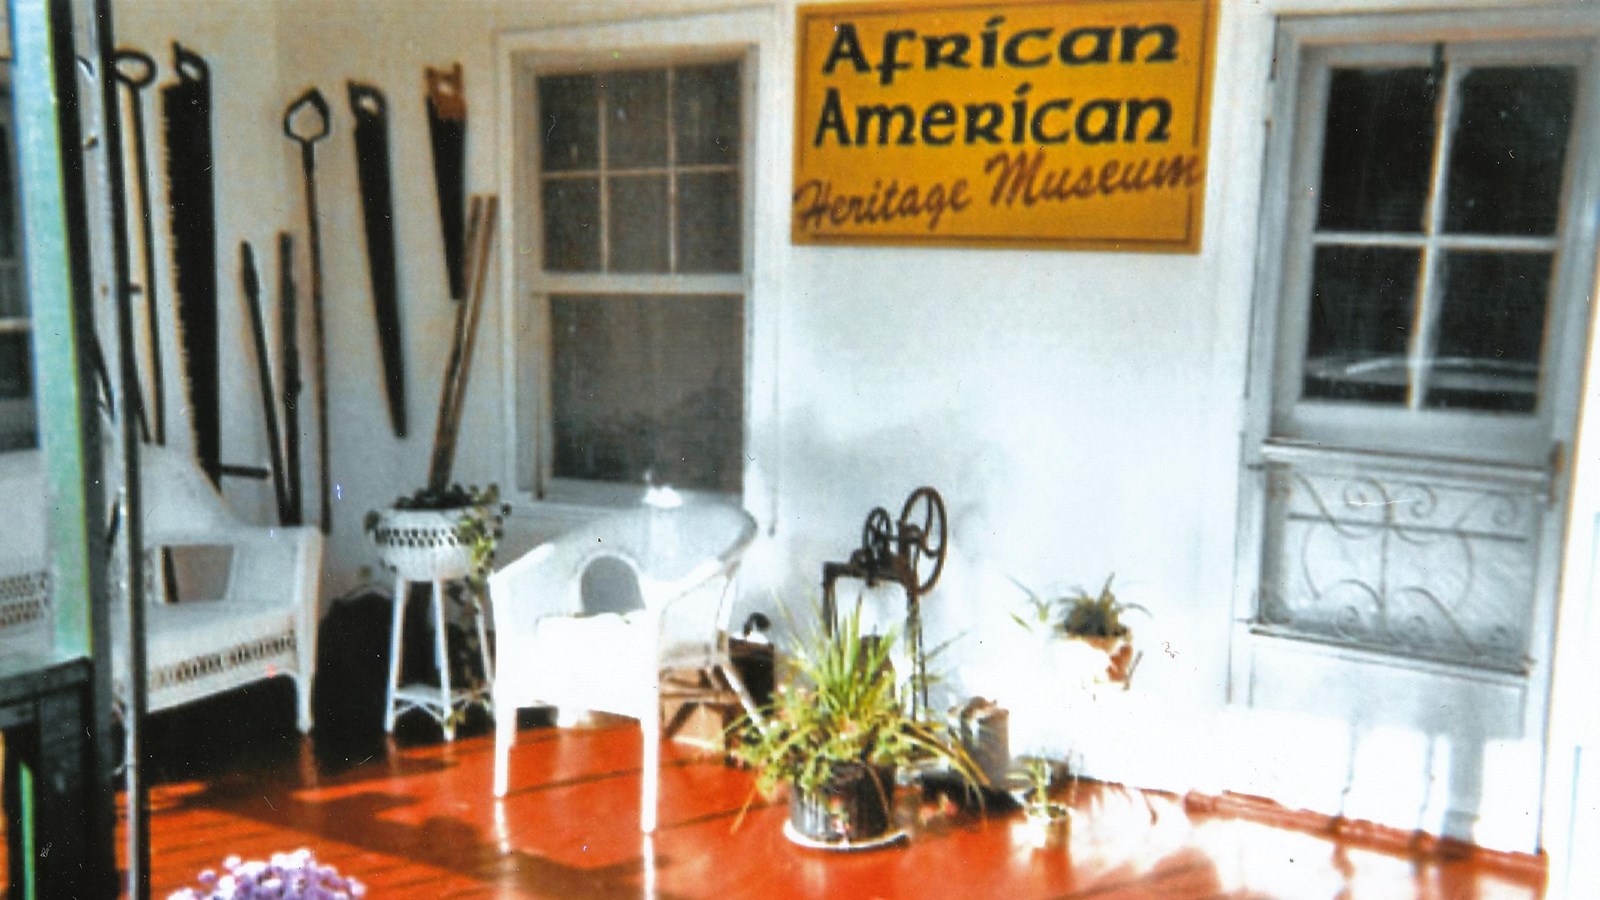 porch of an African American Heritage museum